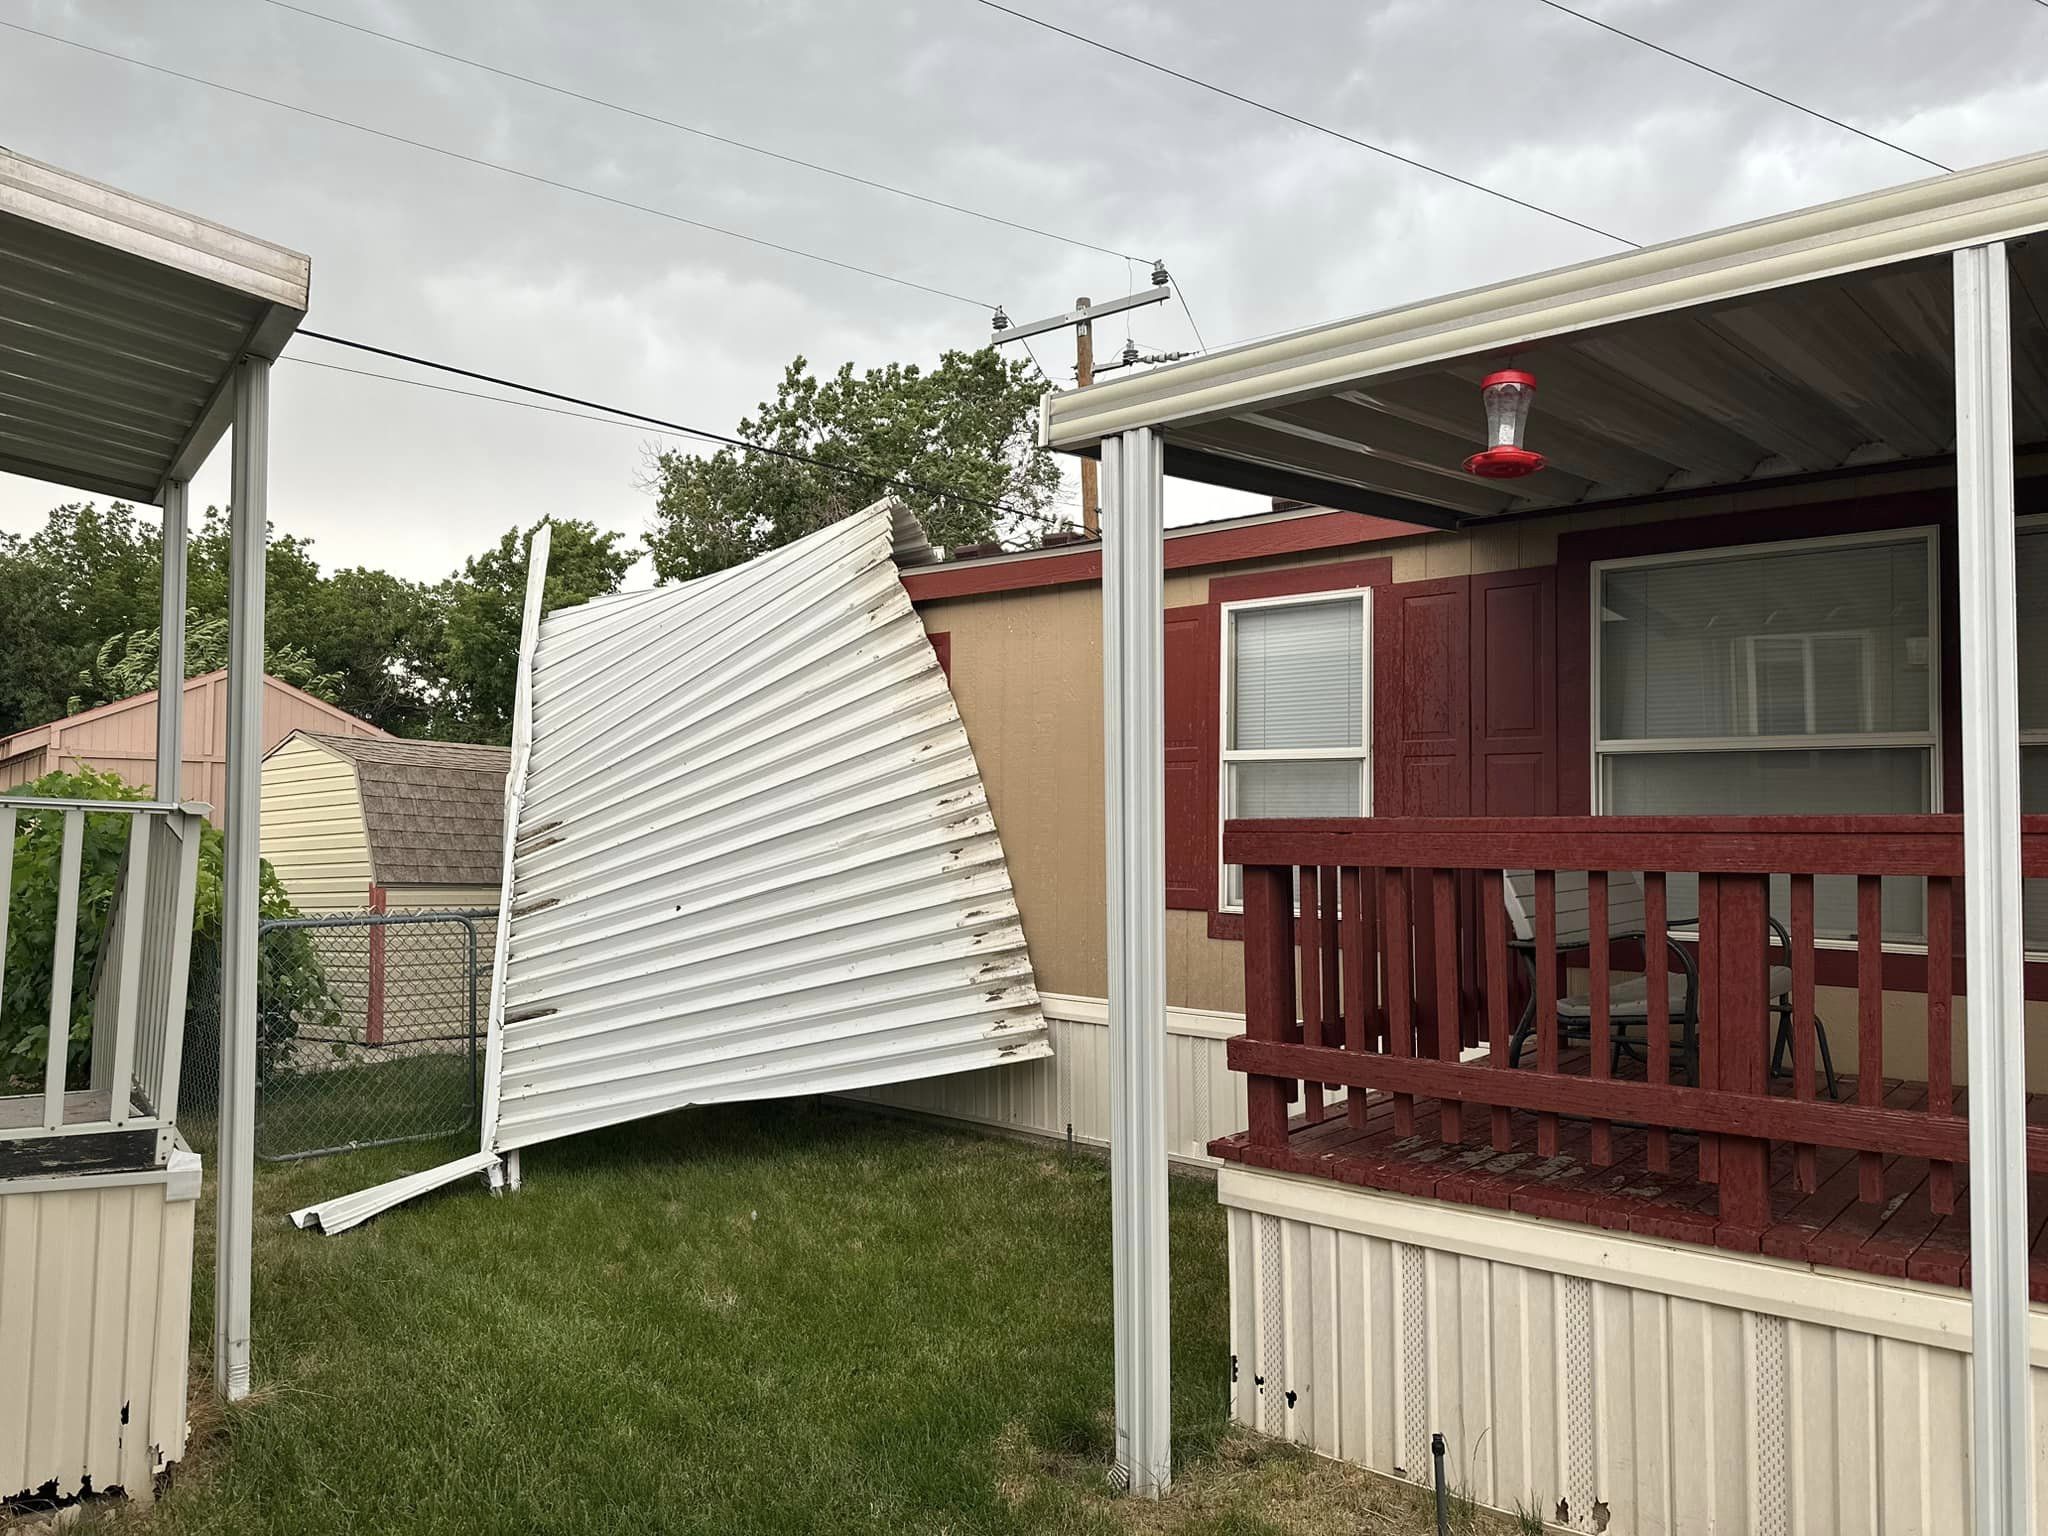 Monday evening's severe thunderstorm did damage to this home in Riverdale. Photo credit: Alan Murph...